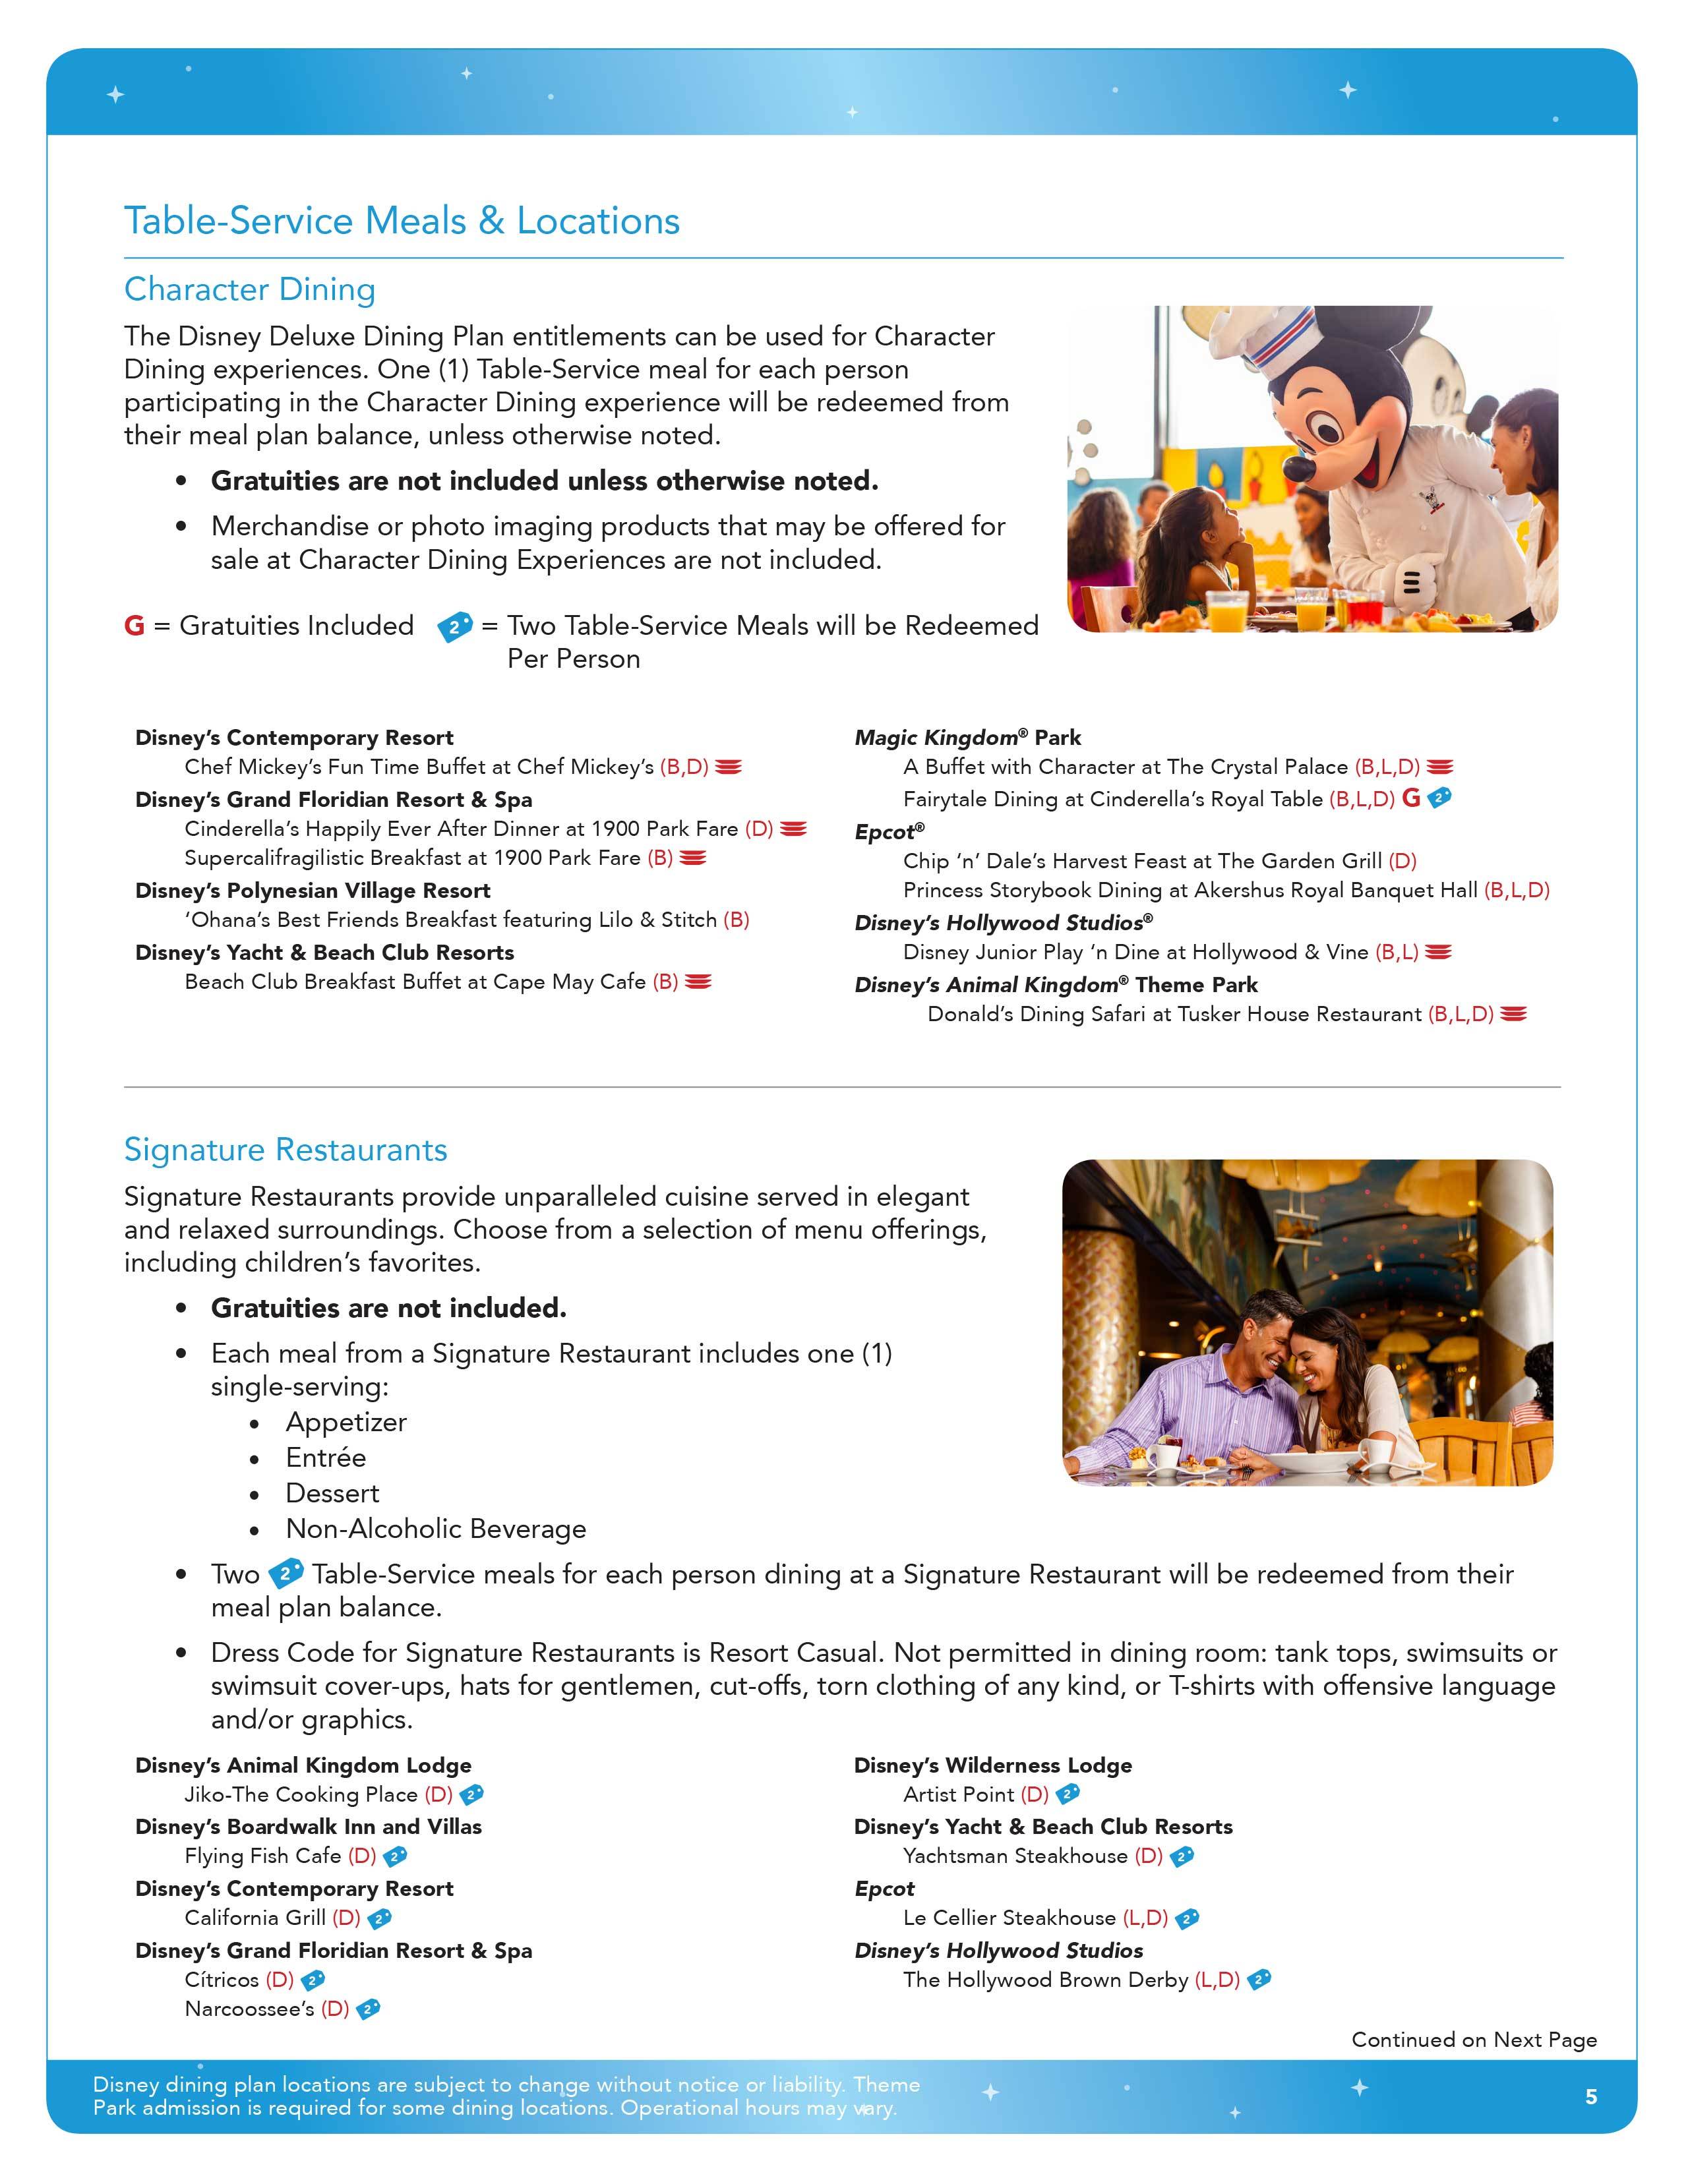 2016 Disney Deluxe Dining Plan brochure - Page 5